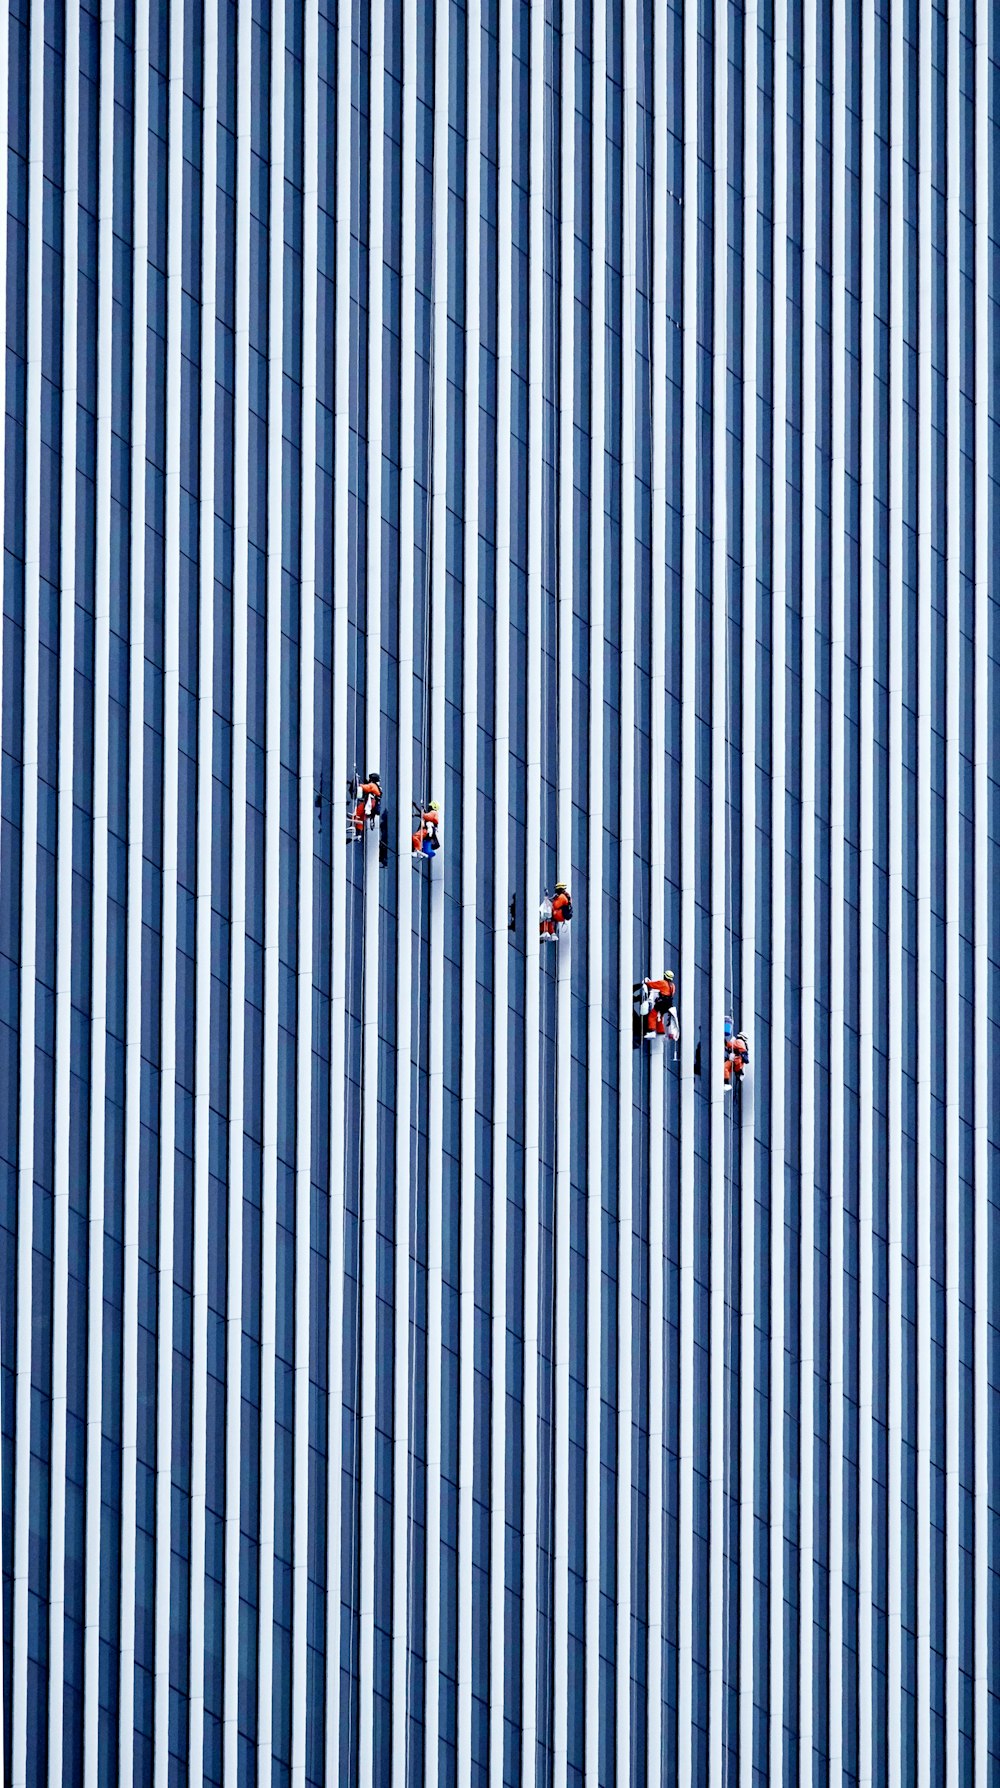 people walking on white and blue striped wall